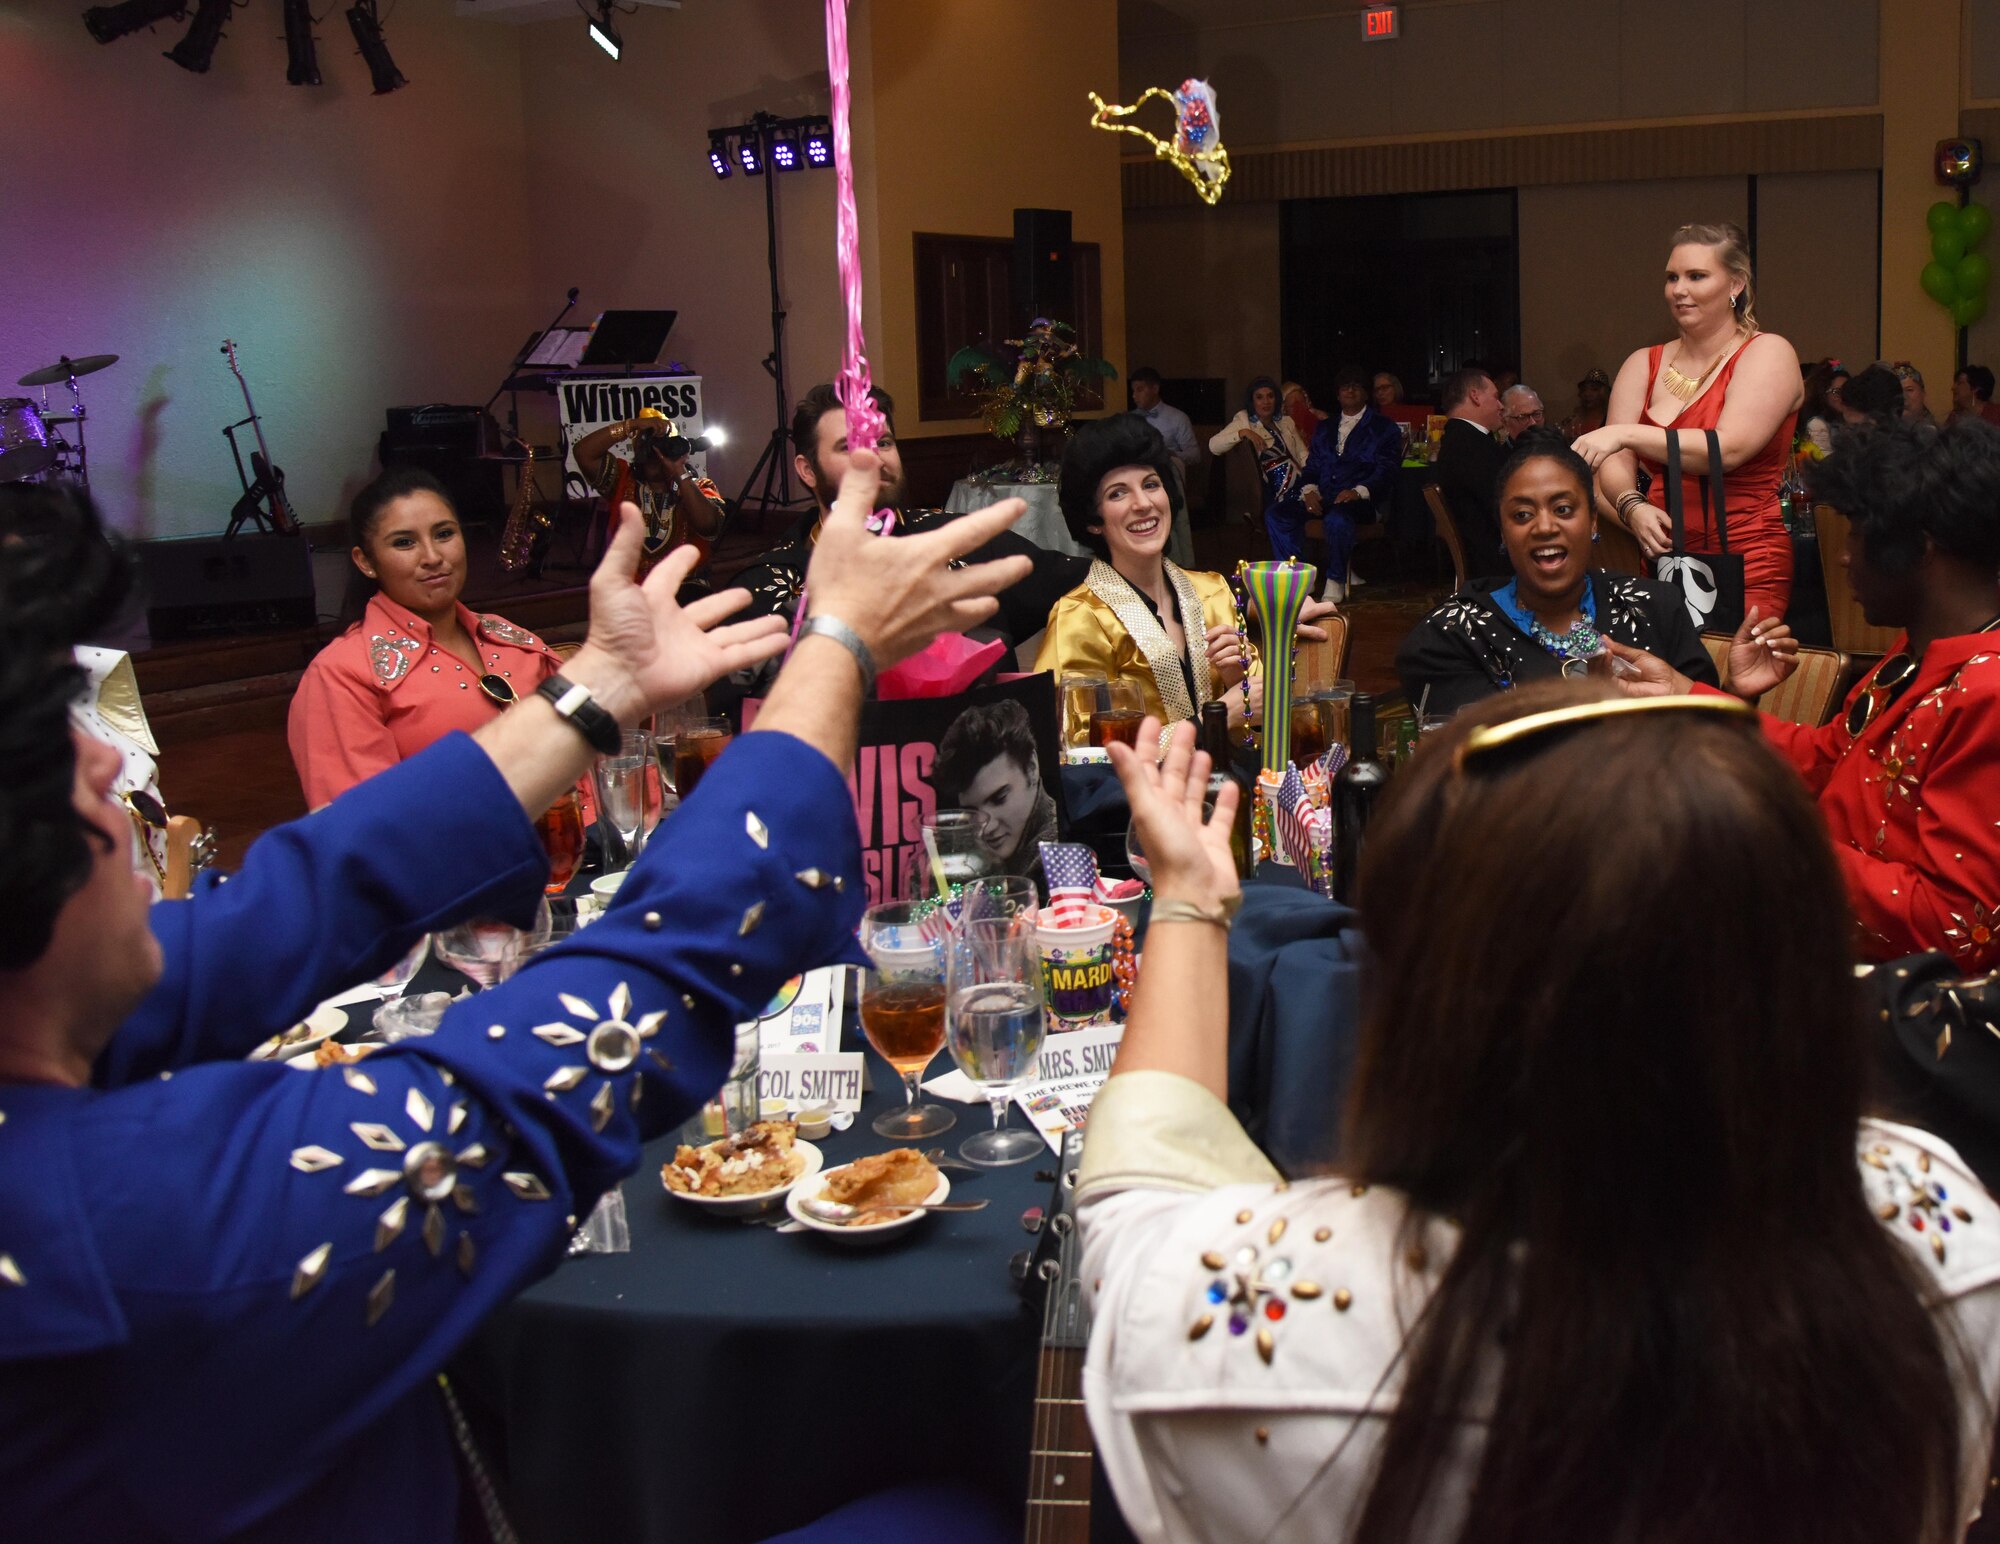 Col. C. Mike Smith, 81st Training Wing vice commander, and his wife, Kristi, reach for beads during the 29th Annual Krewe of Medics Mardi Gras Ball at the Bay Breeze Event Center Jan. 28, 2017, on Keesler Air Force Base, Miss. The Krewe of Medics hosts a yearly ball to give Keesler Medical Center personnel a taste of the Gulf Coast and an opportunity to experience a traditional Mardi Gras. The theme for this year's ball was Blast From The Past. (U.S. Air Force photo by Kemberly Groue)